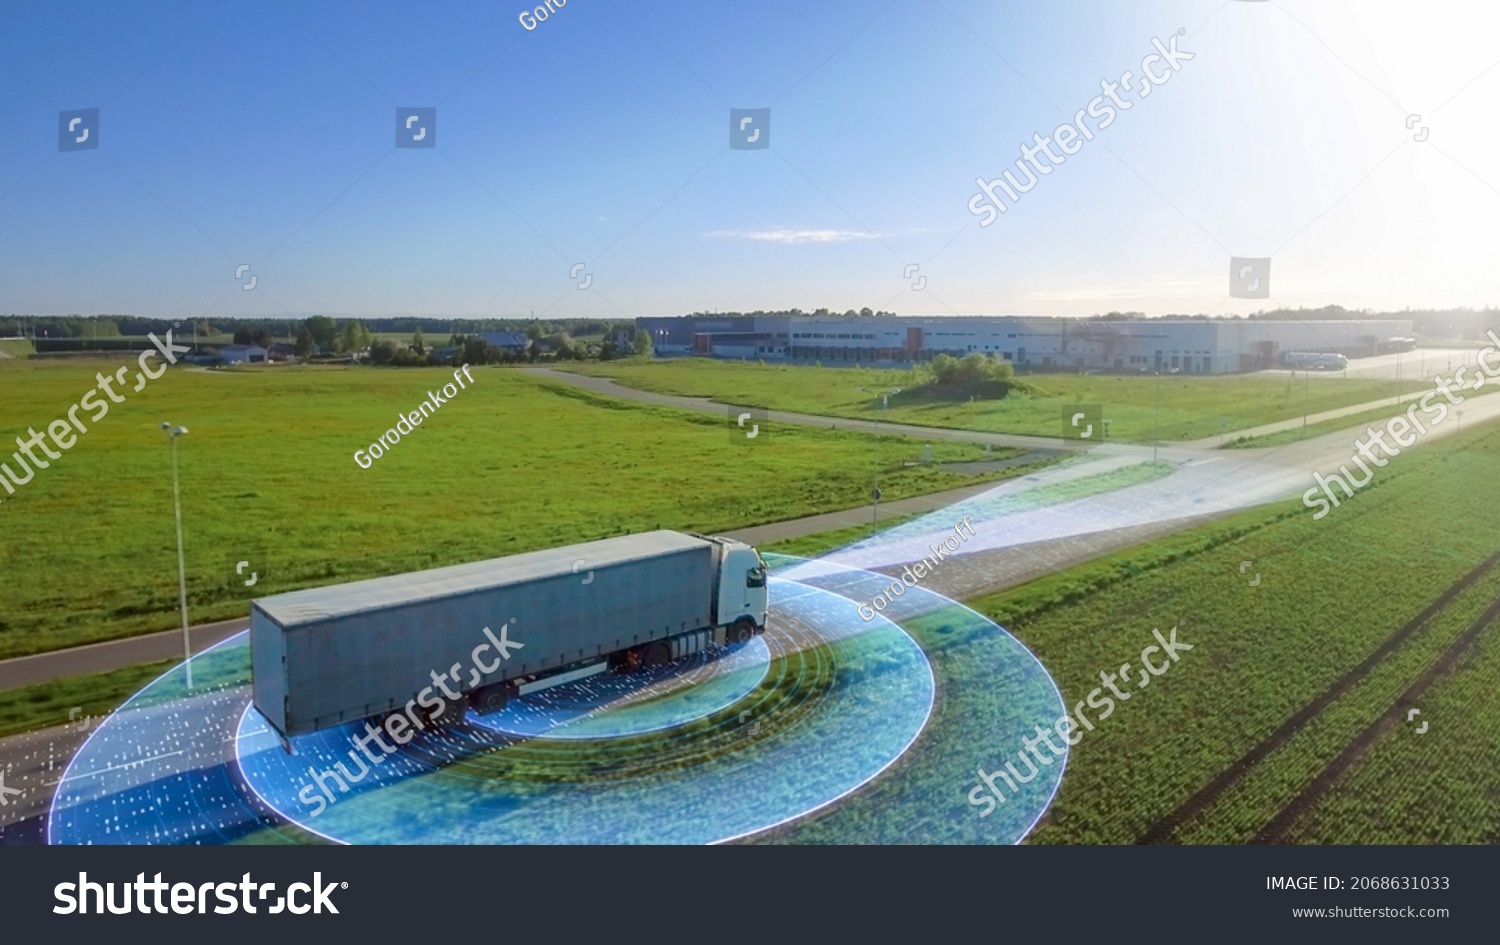 Futuristic High-Tech Concept: Big Semi Truck with Cargo Trailer Drives on the Road is Transformed with Graphics Special Effects Into Digitalized Advanced Autonomous Truck Concept. Aerial Drone Shot #2068631033